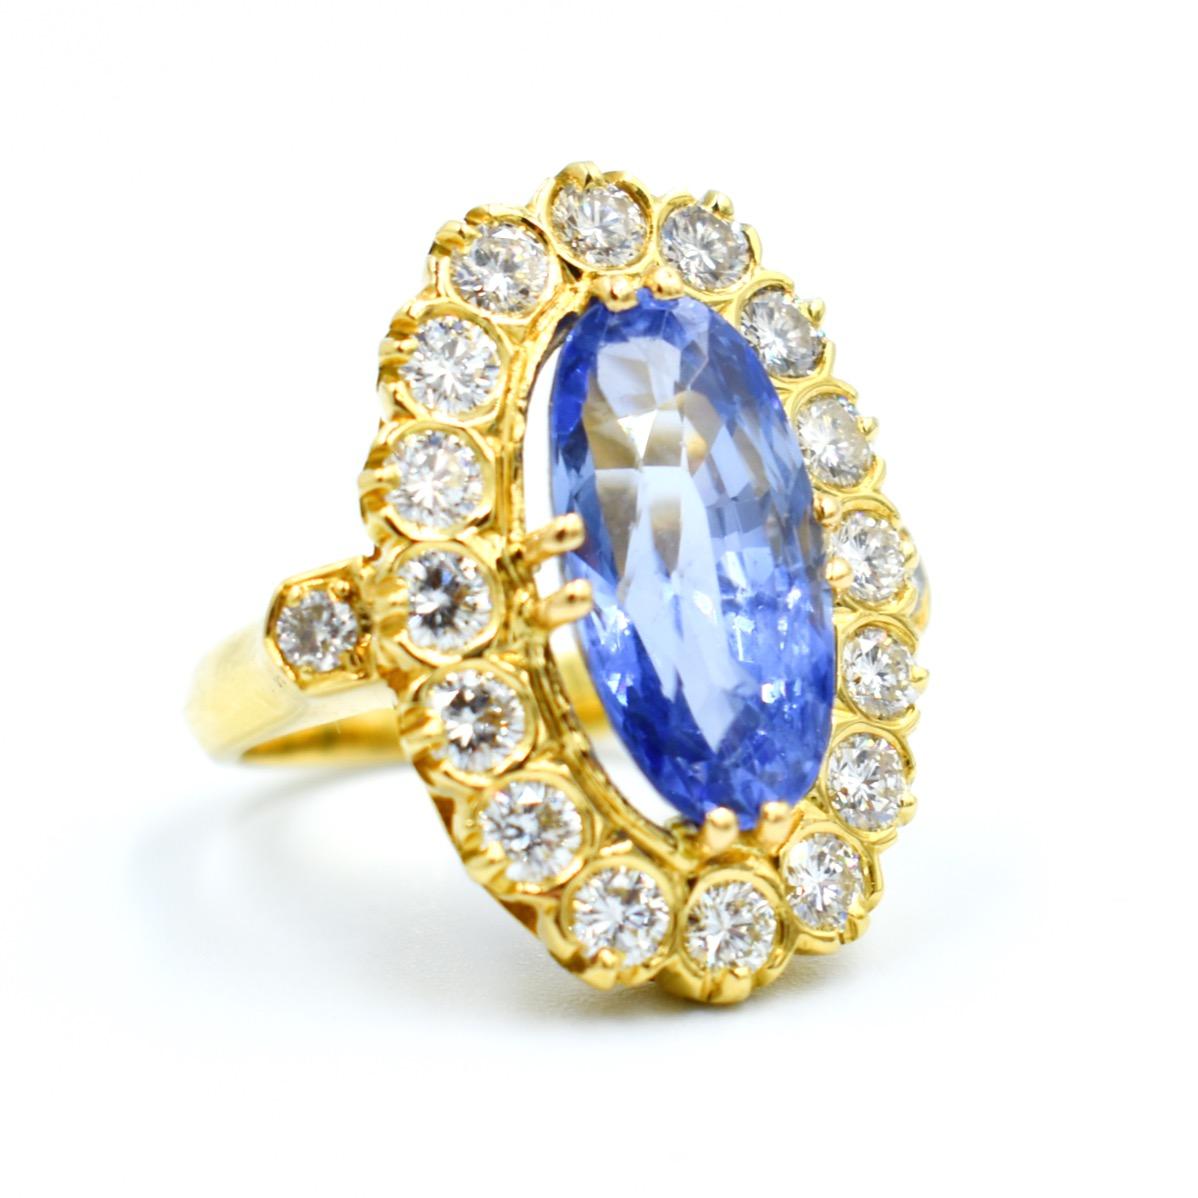 Centering one ovale sapphire 8.34 cts., within a square-shaped mount of 16 round diamonds E/VS quality 2 cts.,  Size 51 FR (5.75 US - L UK) 
With GEM PARIS report  stating that the sapphire is of Ceylon (Sri Lanka) origin, with no gemological